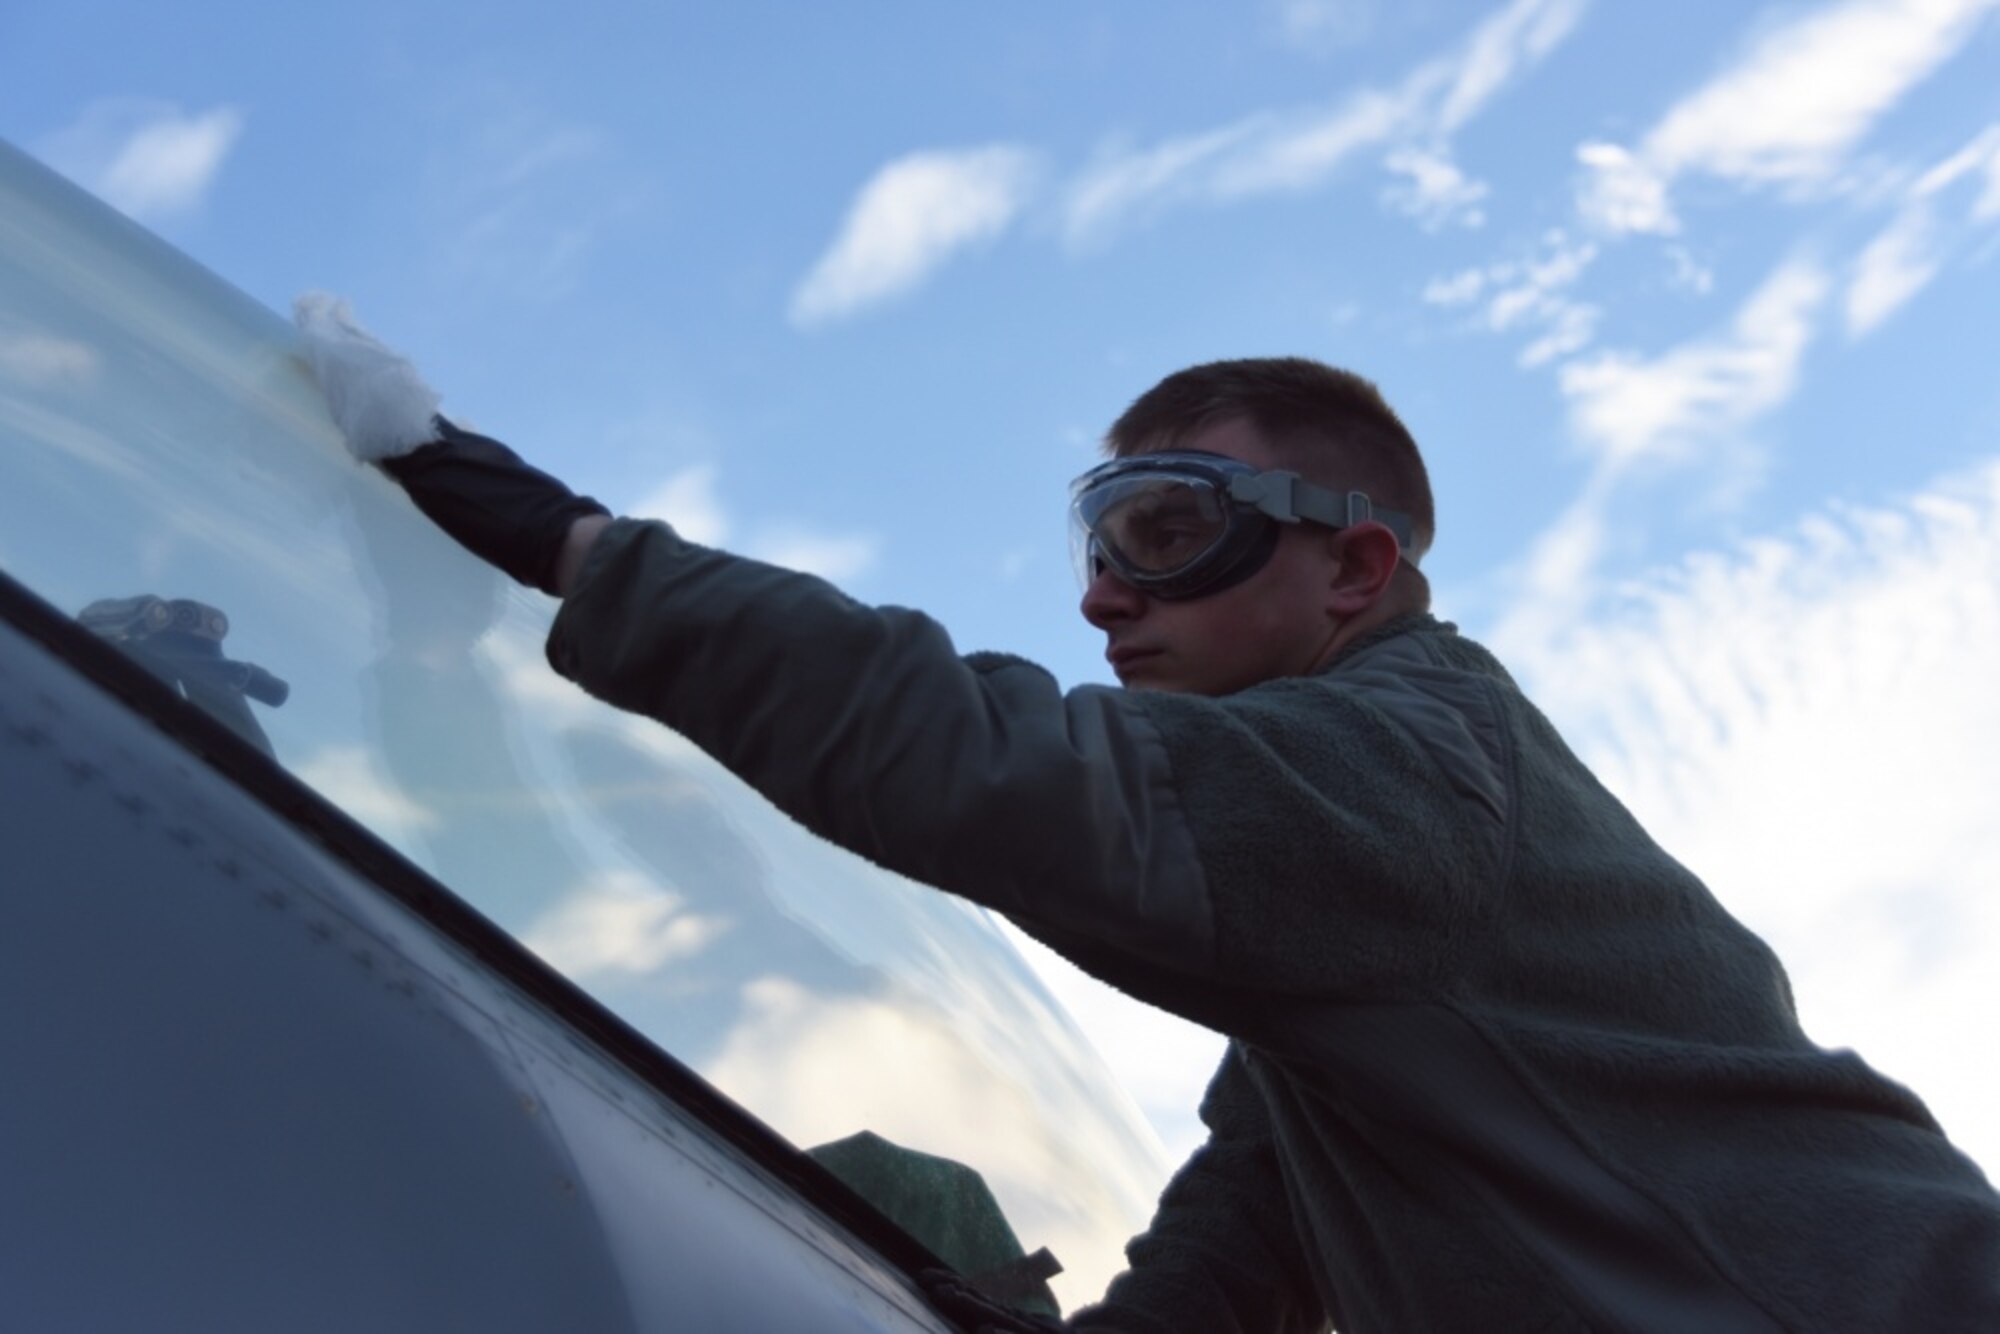 Staff Sgt. Brian Dement, a crew chief assigned to the 180th Fighter Wing, Ohio Air National Guard, polishes the canopy of an F-16 Fighting Falcon before early morning training sorties at Patrick Air Force Base, Florida, Jan. 30, 2019. As part of the Patrick AFB deployment, the 180FW conducted Dissimilar Air Combat Training, Basic Fighter Maneuvers, Defensive Air Counter Tactics and Tactical Intercept missions alongside F-15 Eagles assigned to the 104th Fighter Wing, Barnes Air National Guard Base, Massachusetts. (Air National Guard photo by Senior Airman Hope Geiger)